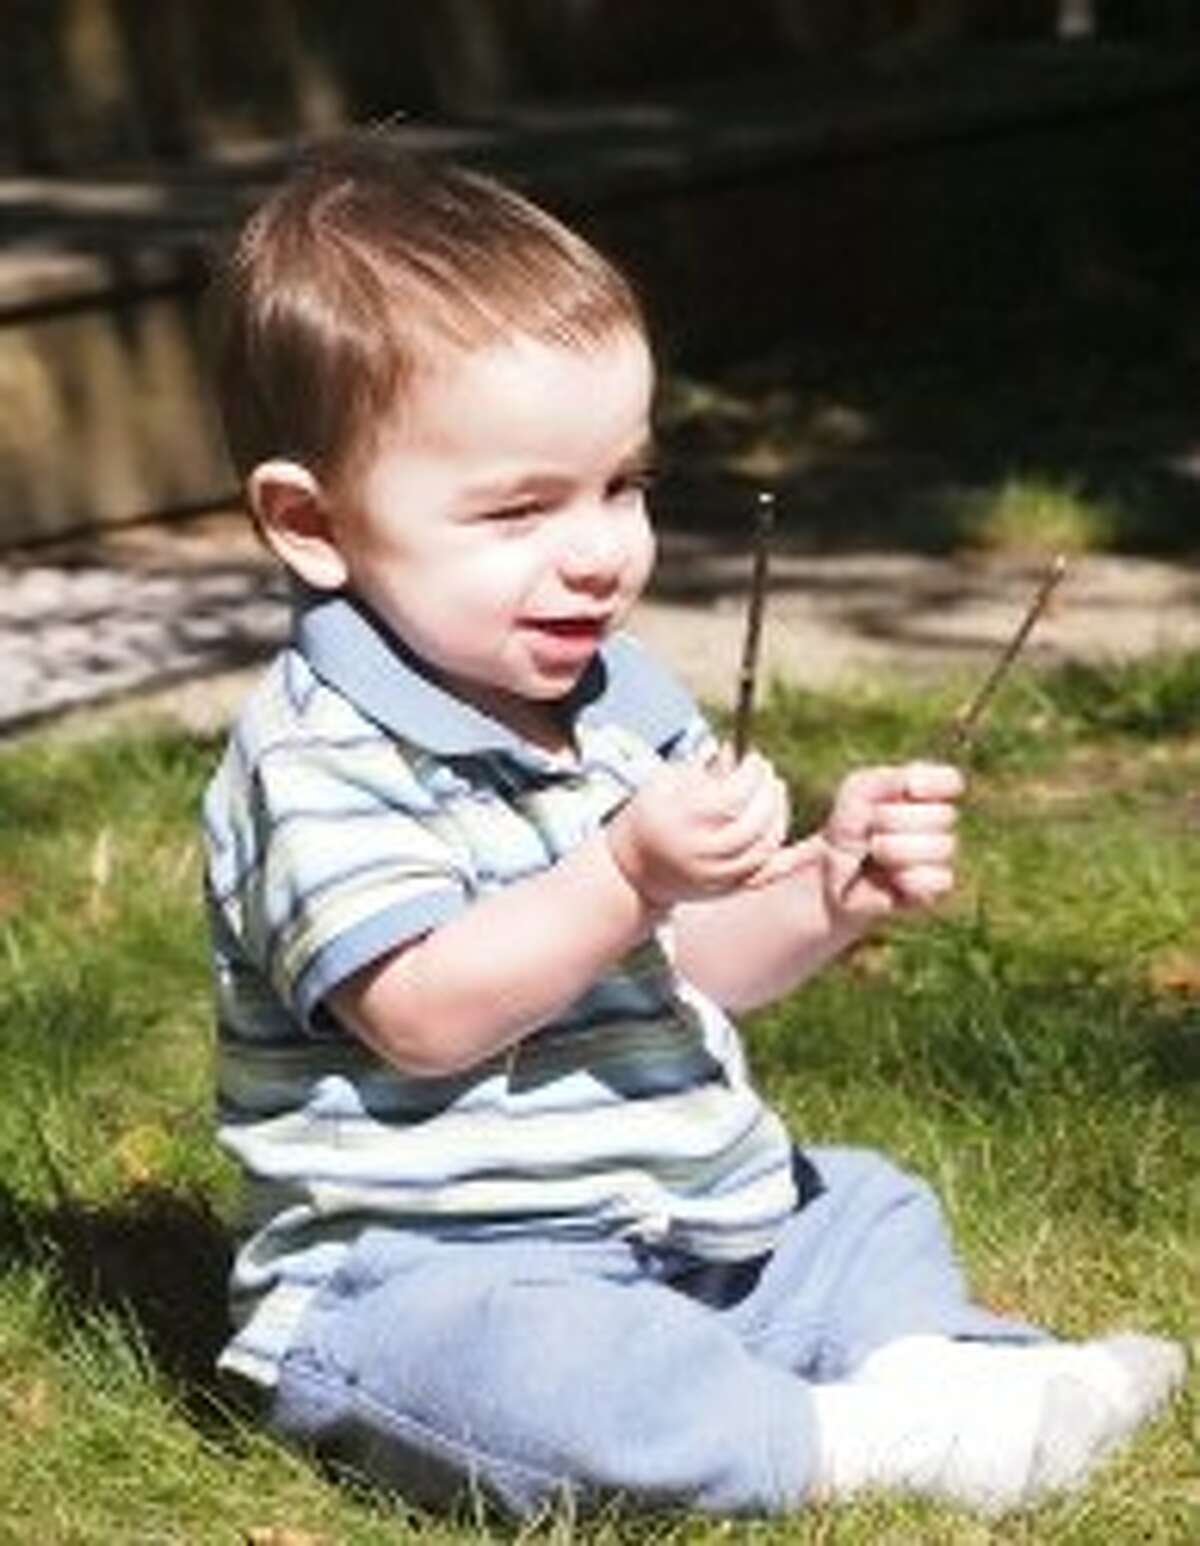 Owen Pointer, who will turn 2 years old next month, plays with two sticks in his grandparent's backyard. This week Owen and his family celebrated the one-year anniversary of him getting a new, healthy heart. (Courtesy Photos/Jeanne Barber)